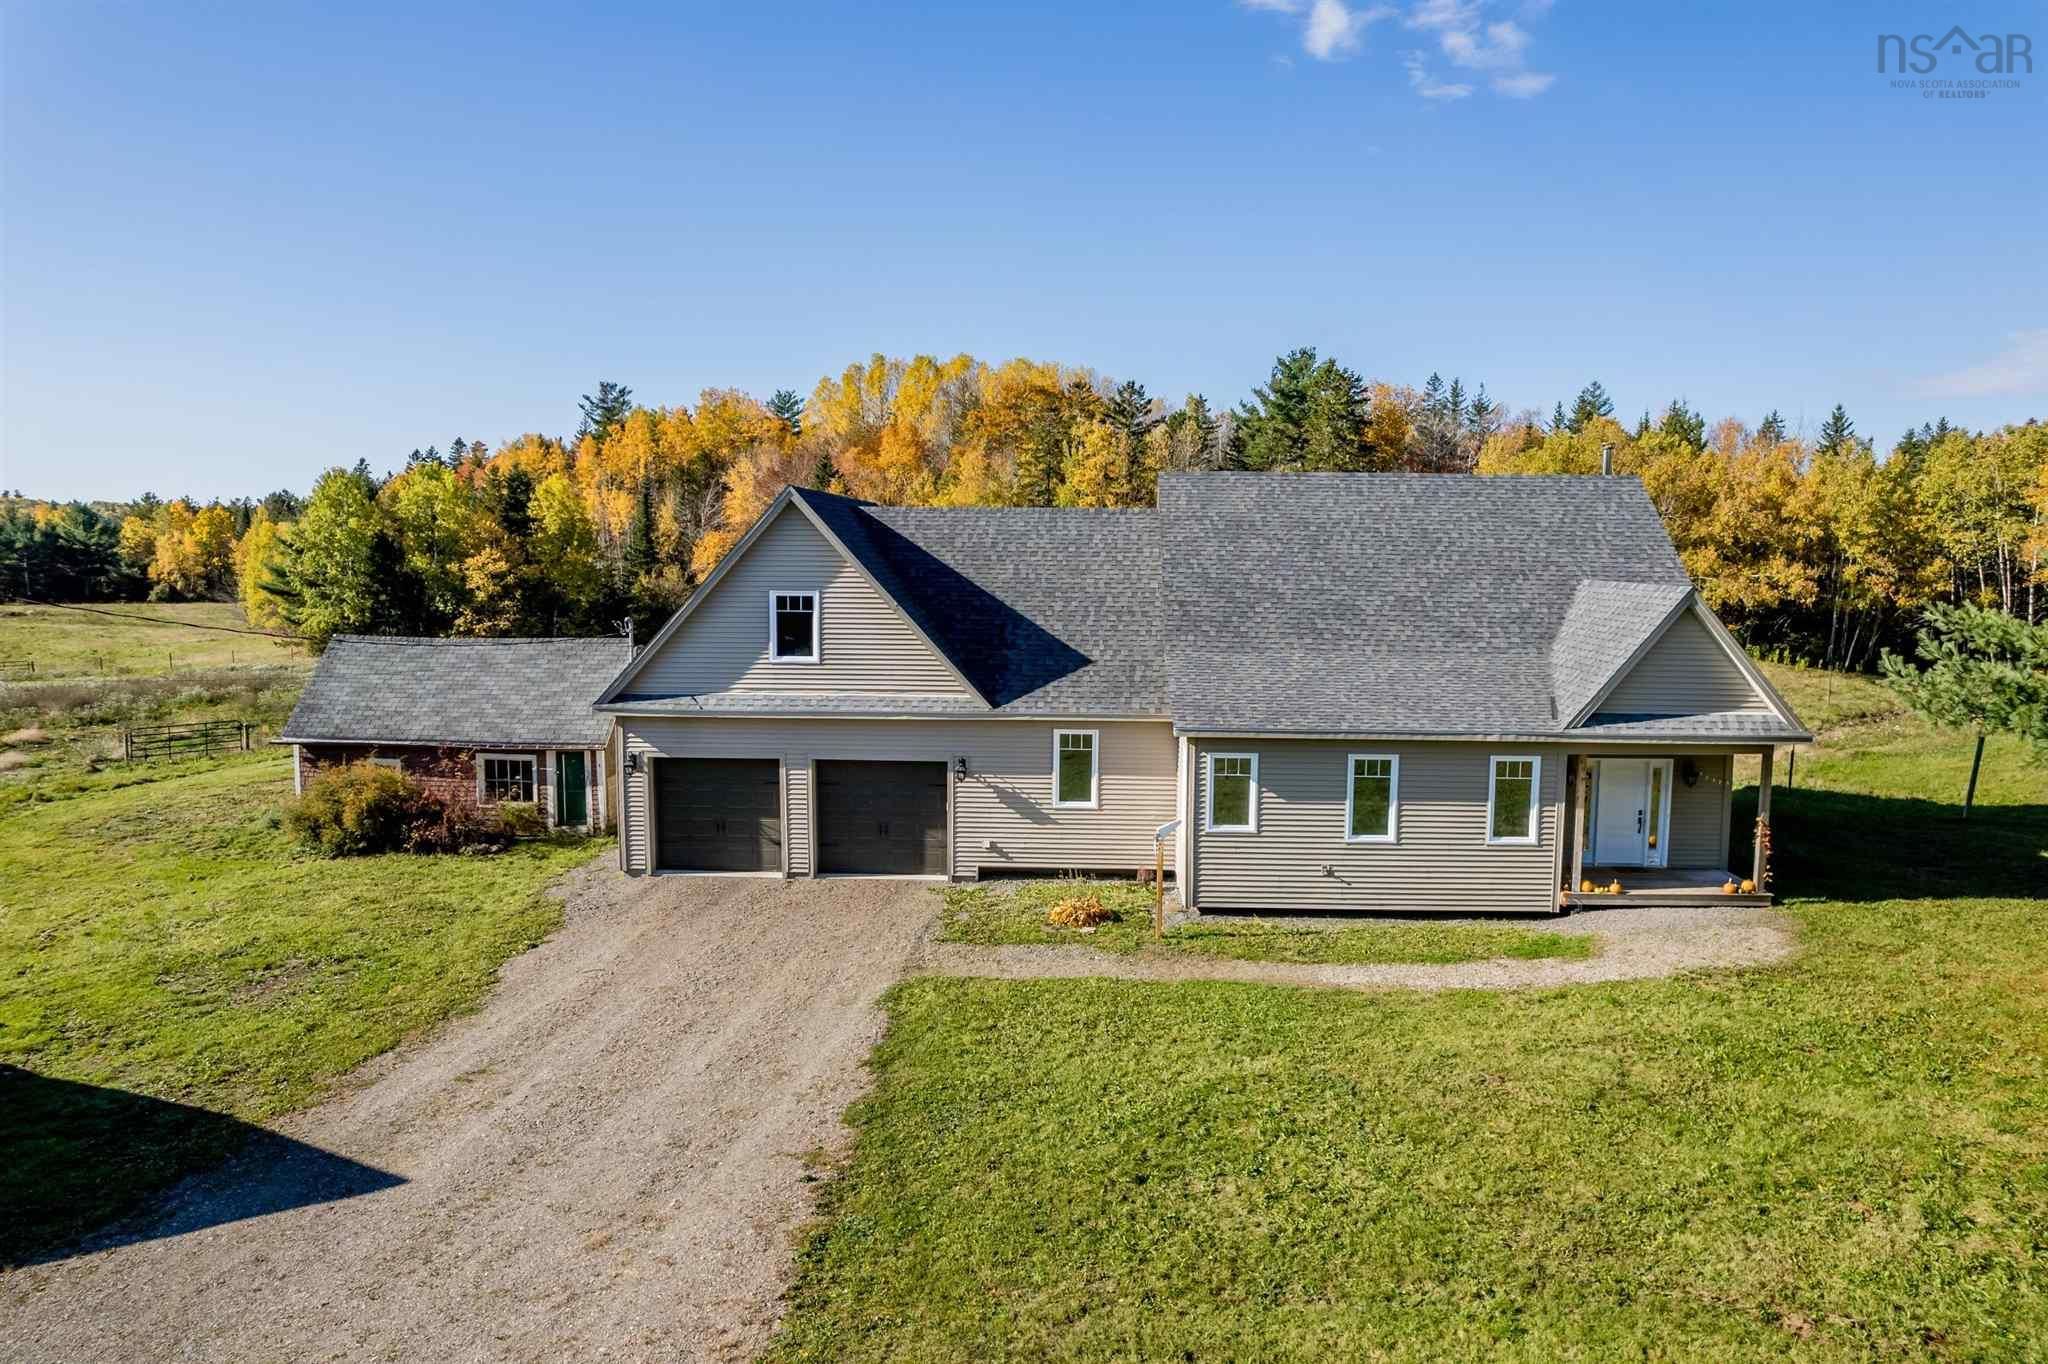 Main Photo: 1321 Greenfield Road in Greenfield: 404-Kings County Residential for sale (Annapolis Valley)  : MLS®# 202127123